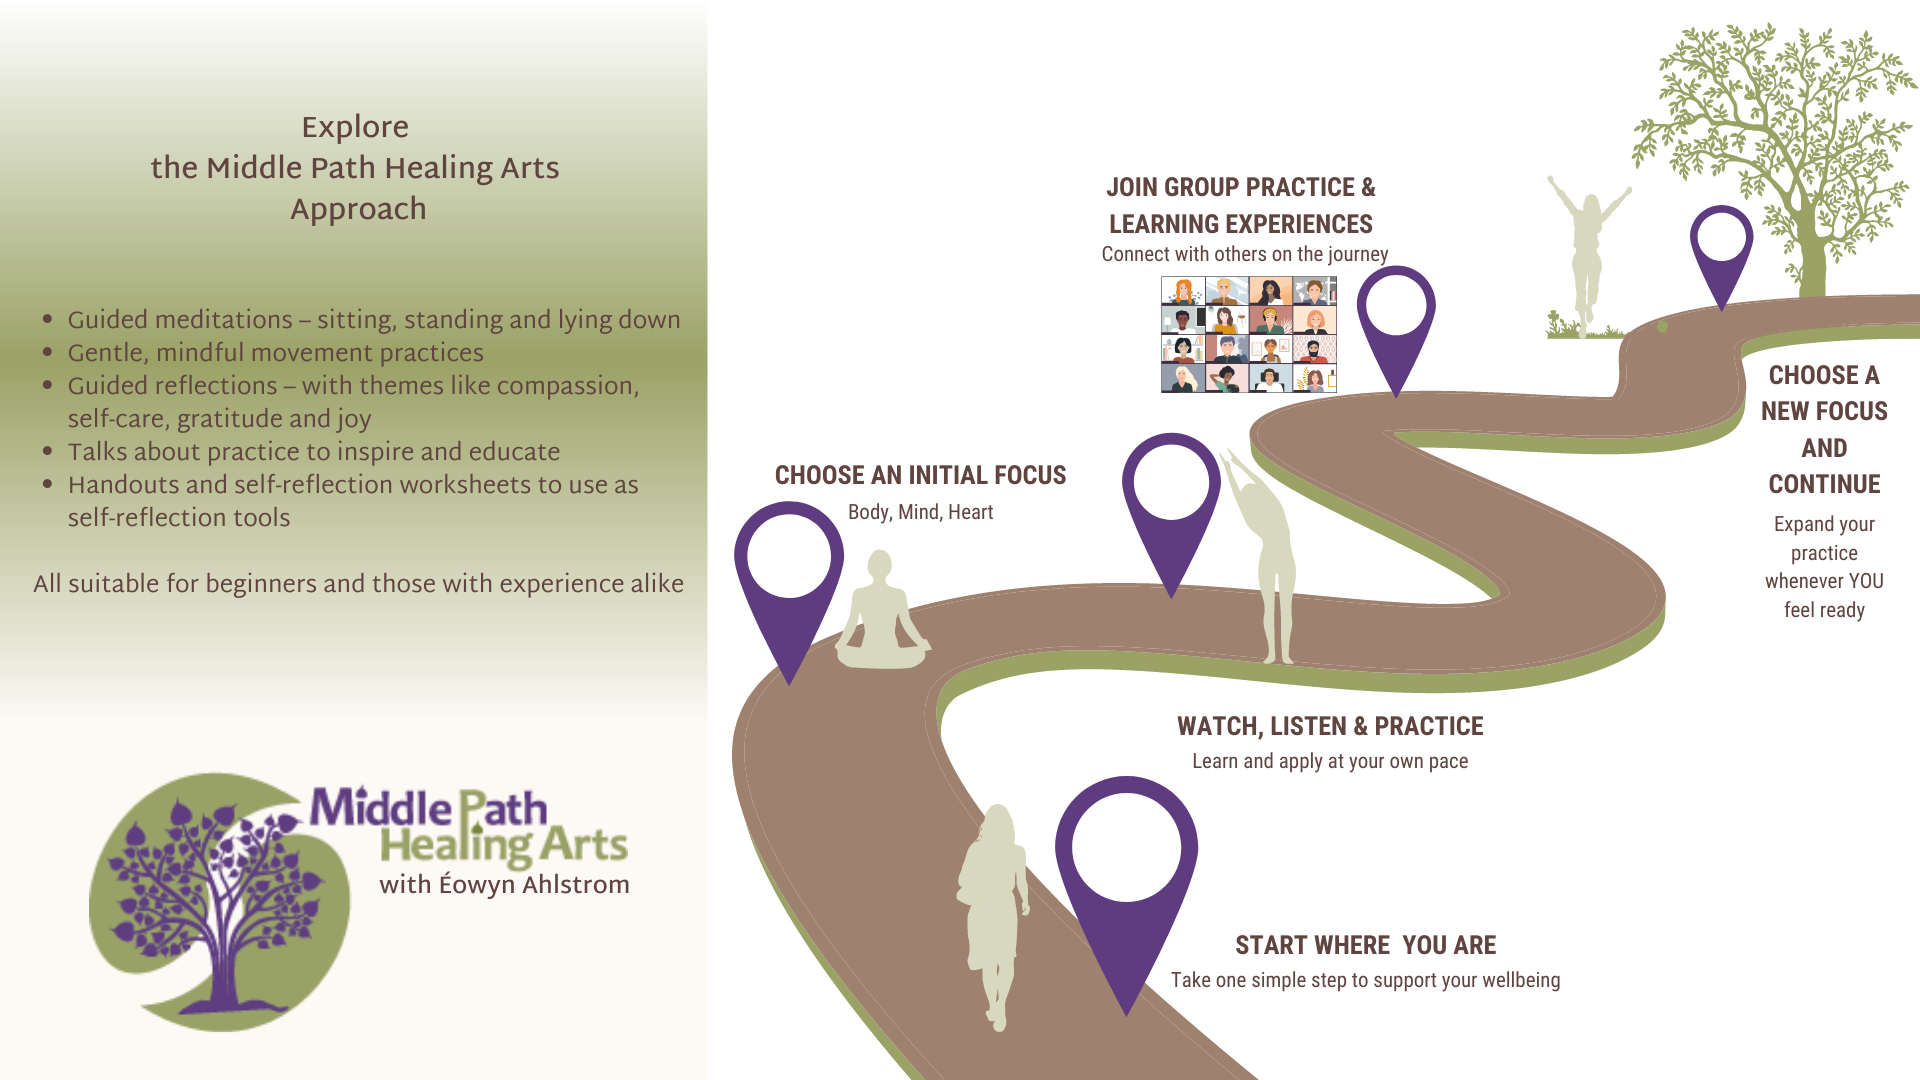 Travel the Middle Path Healing Arts Approach